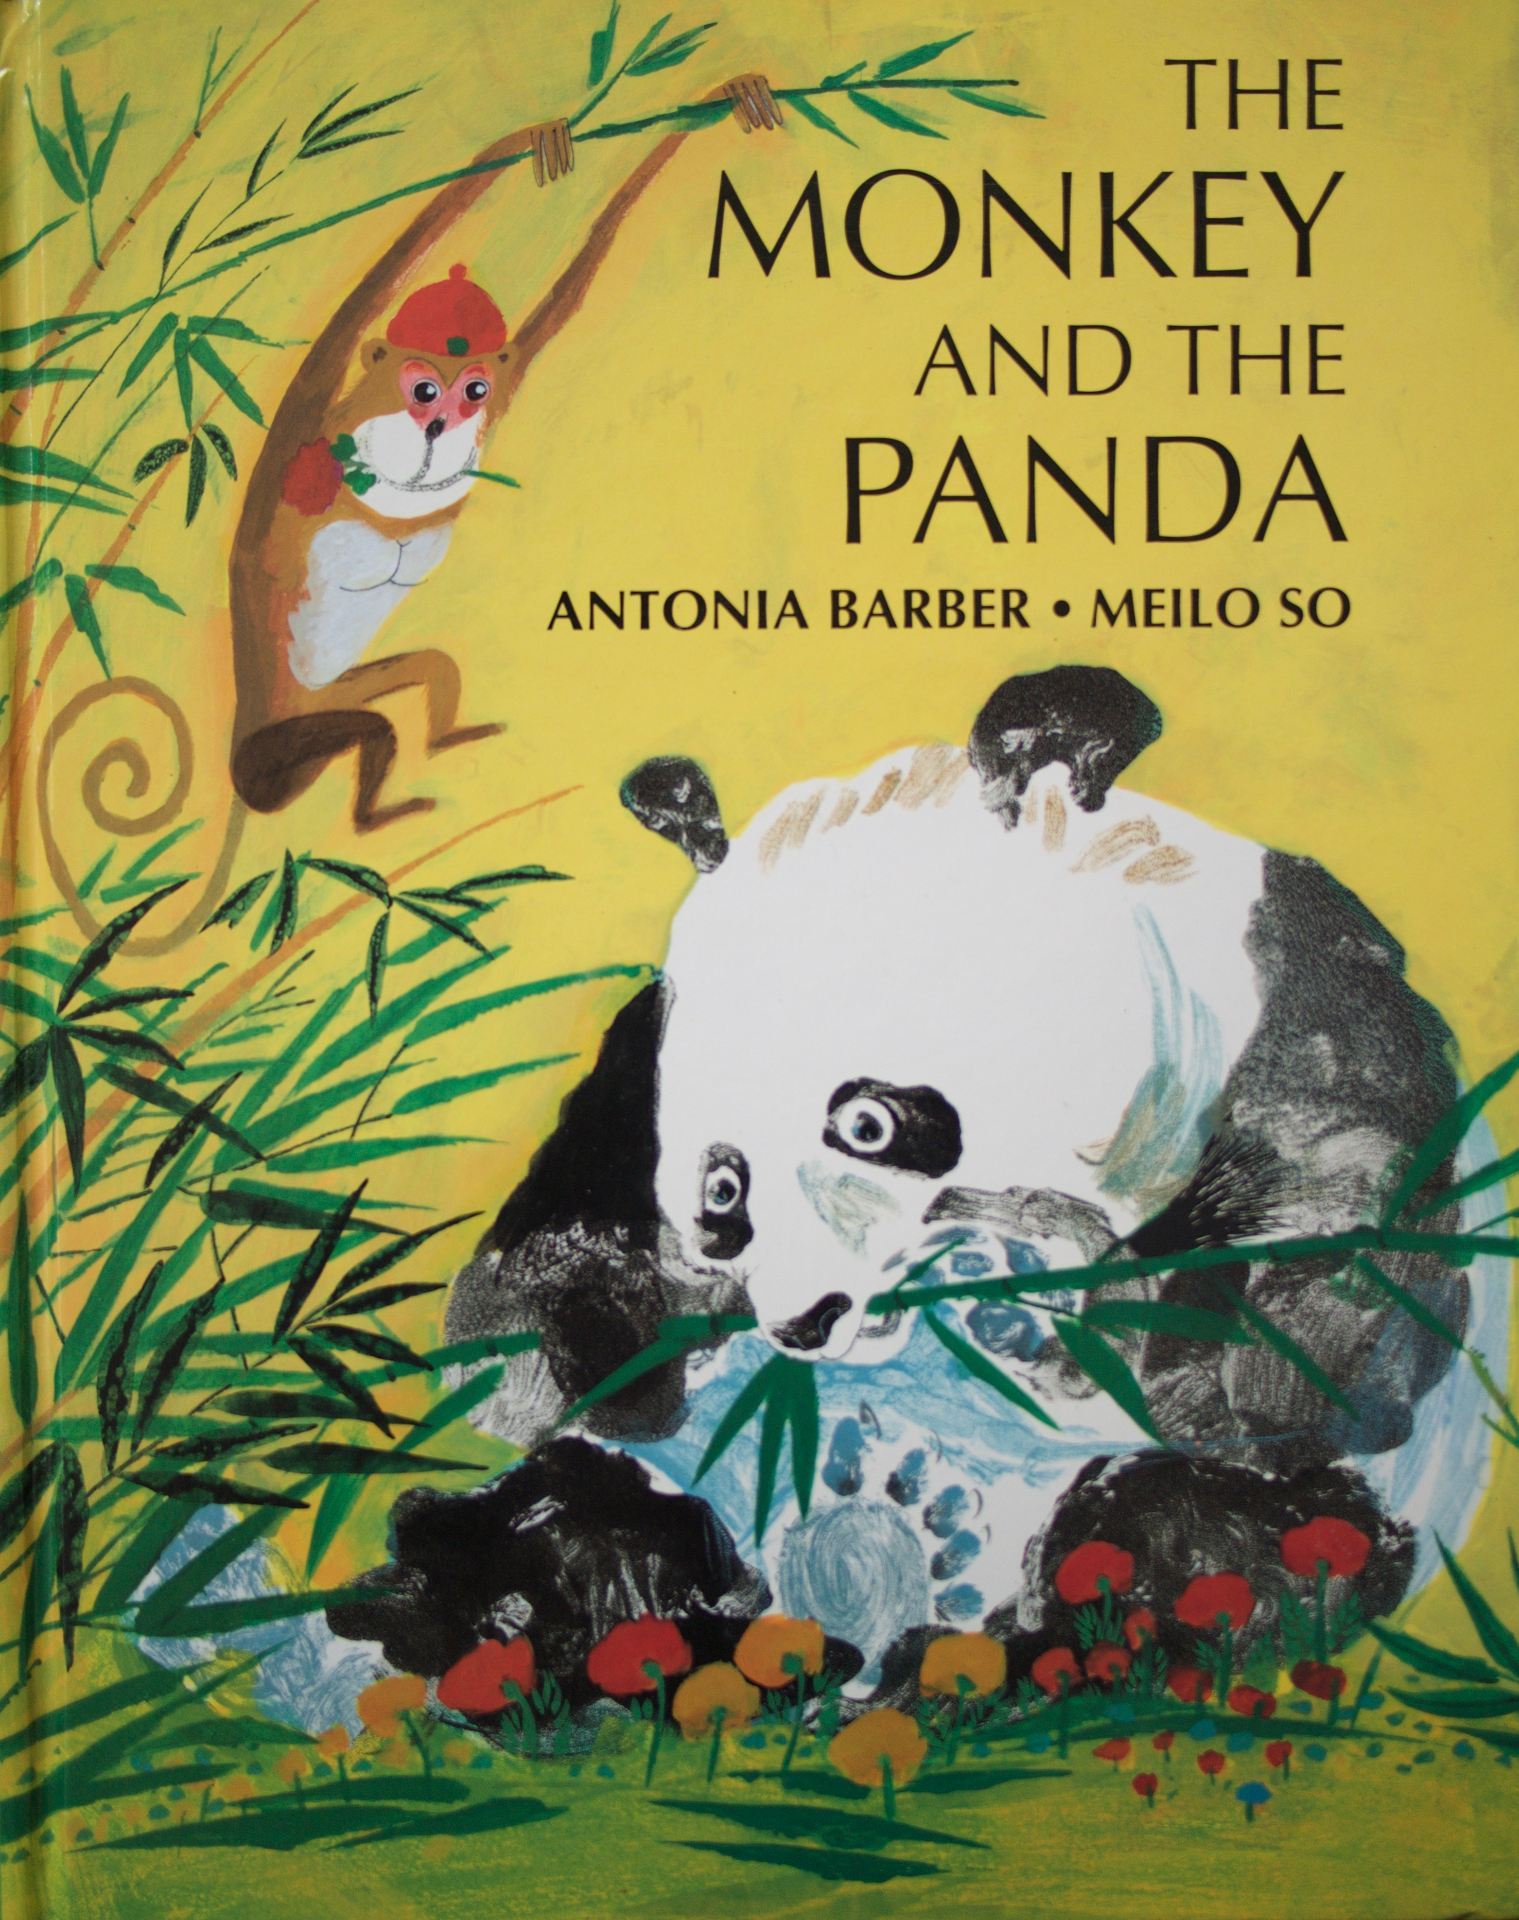 The Monkey and the Panda